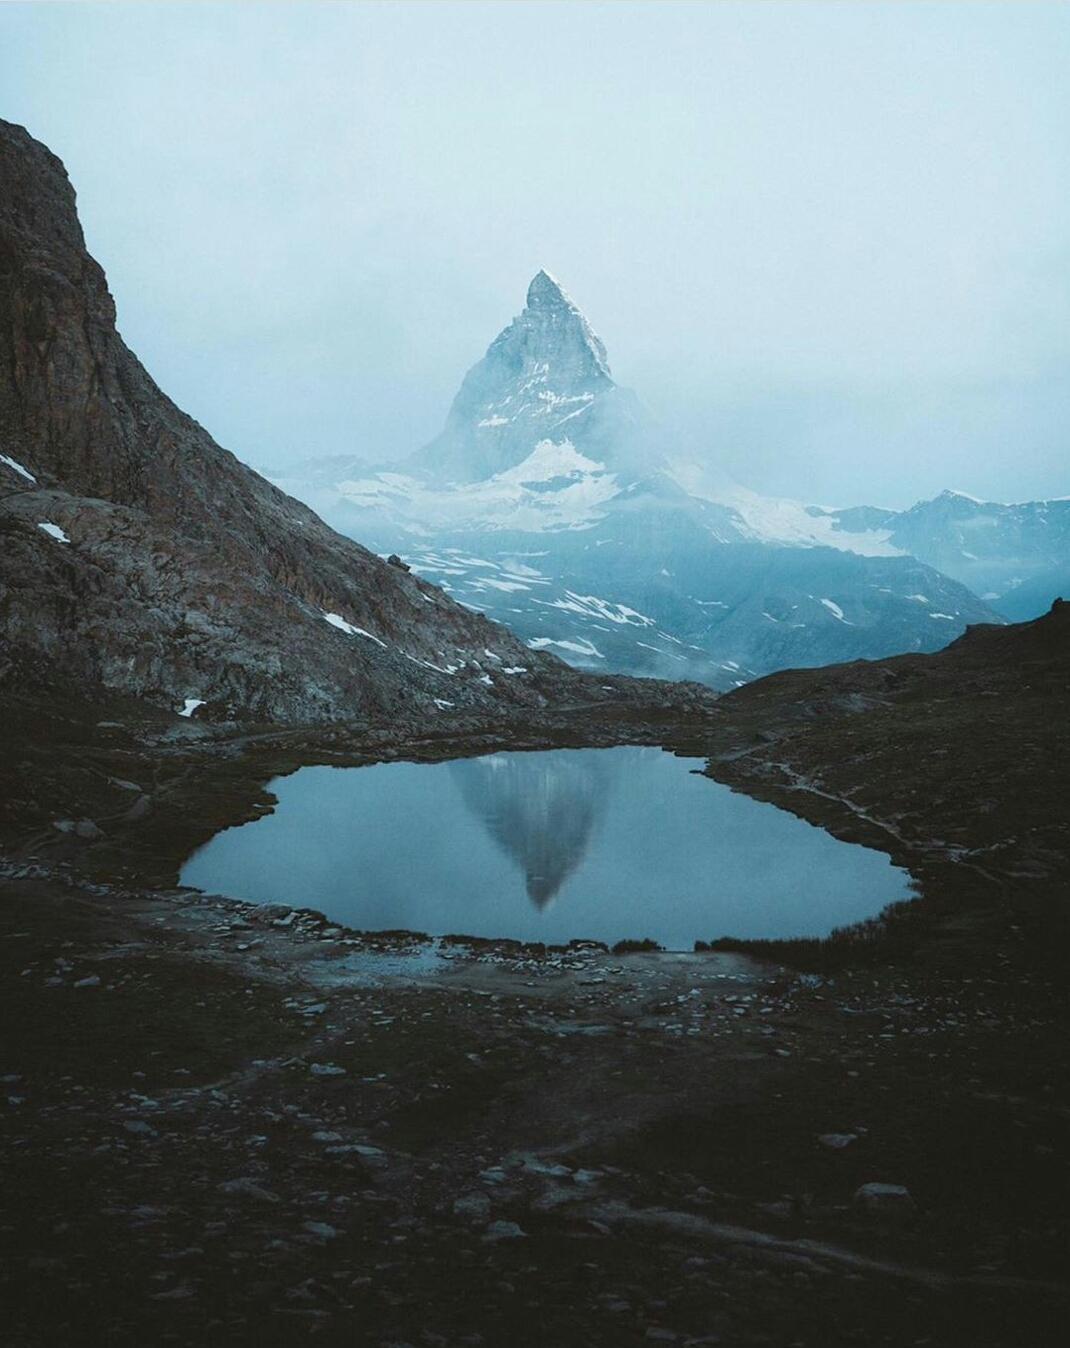 The Matterhorn, a natural attraction that shaped our mountain culture!